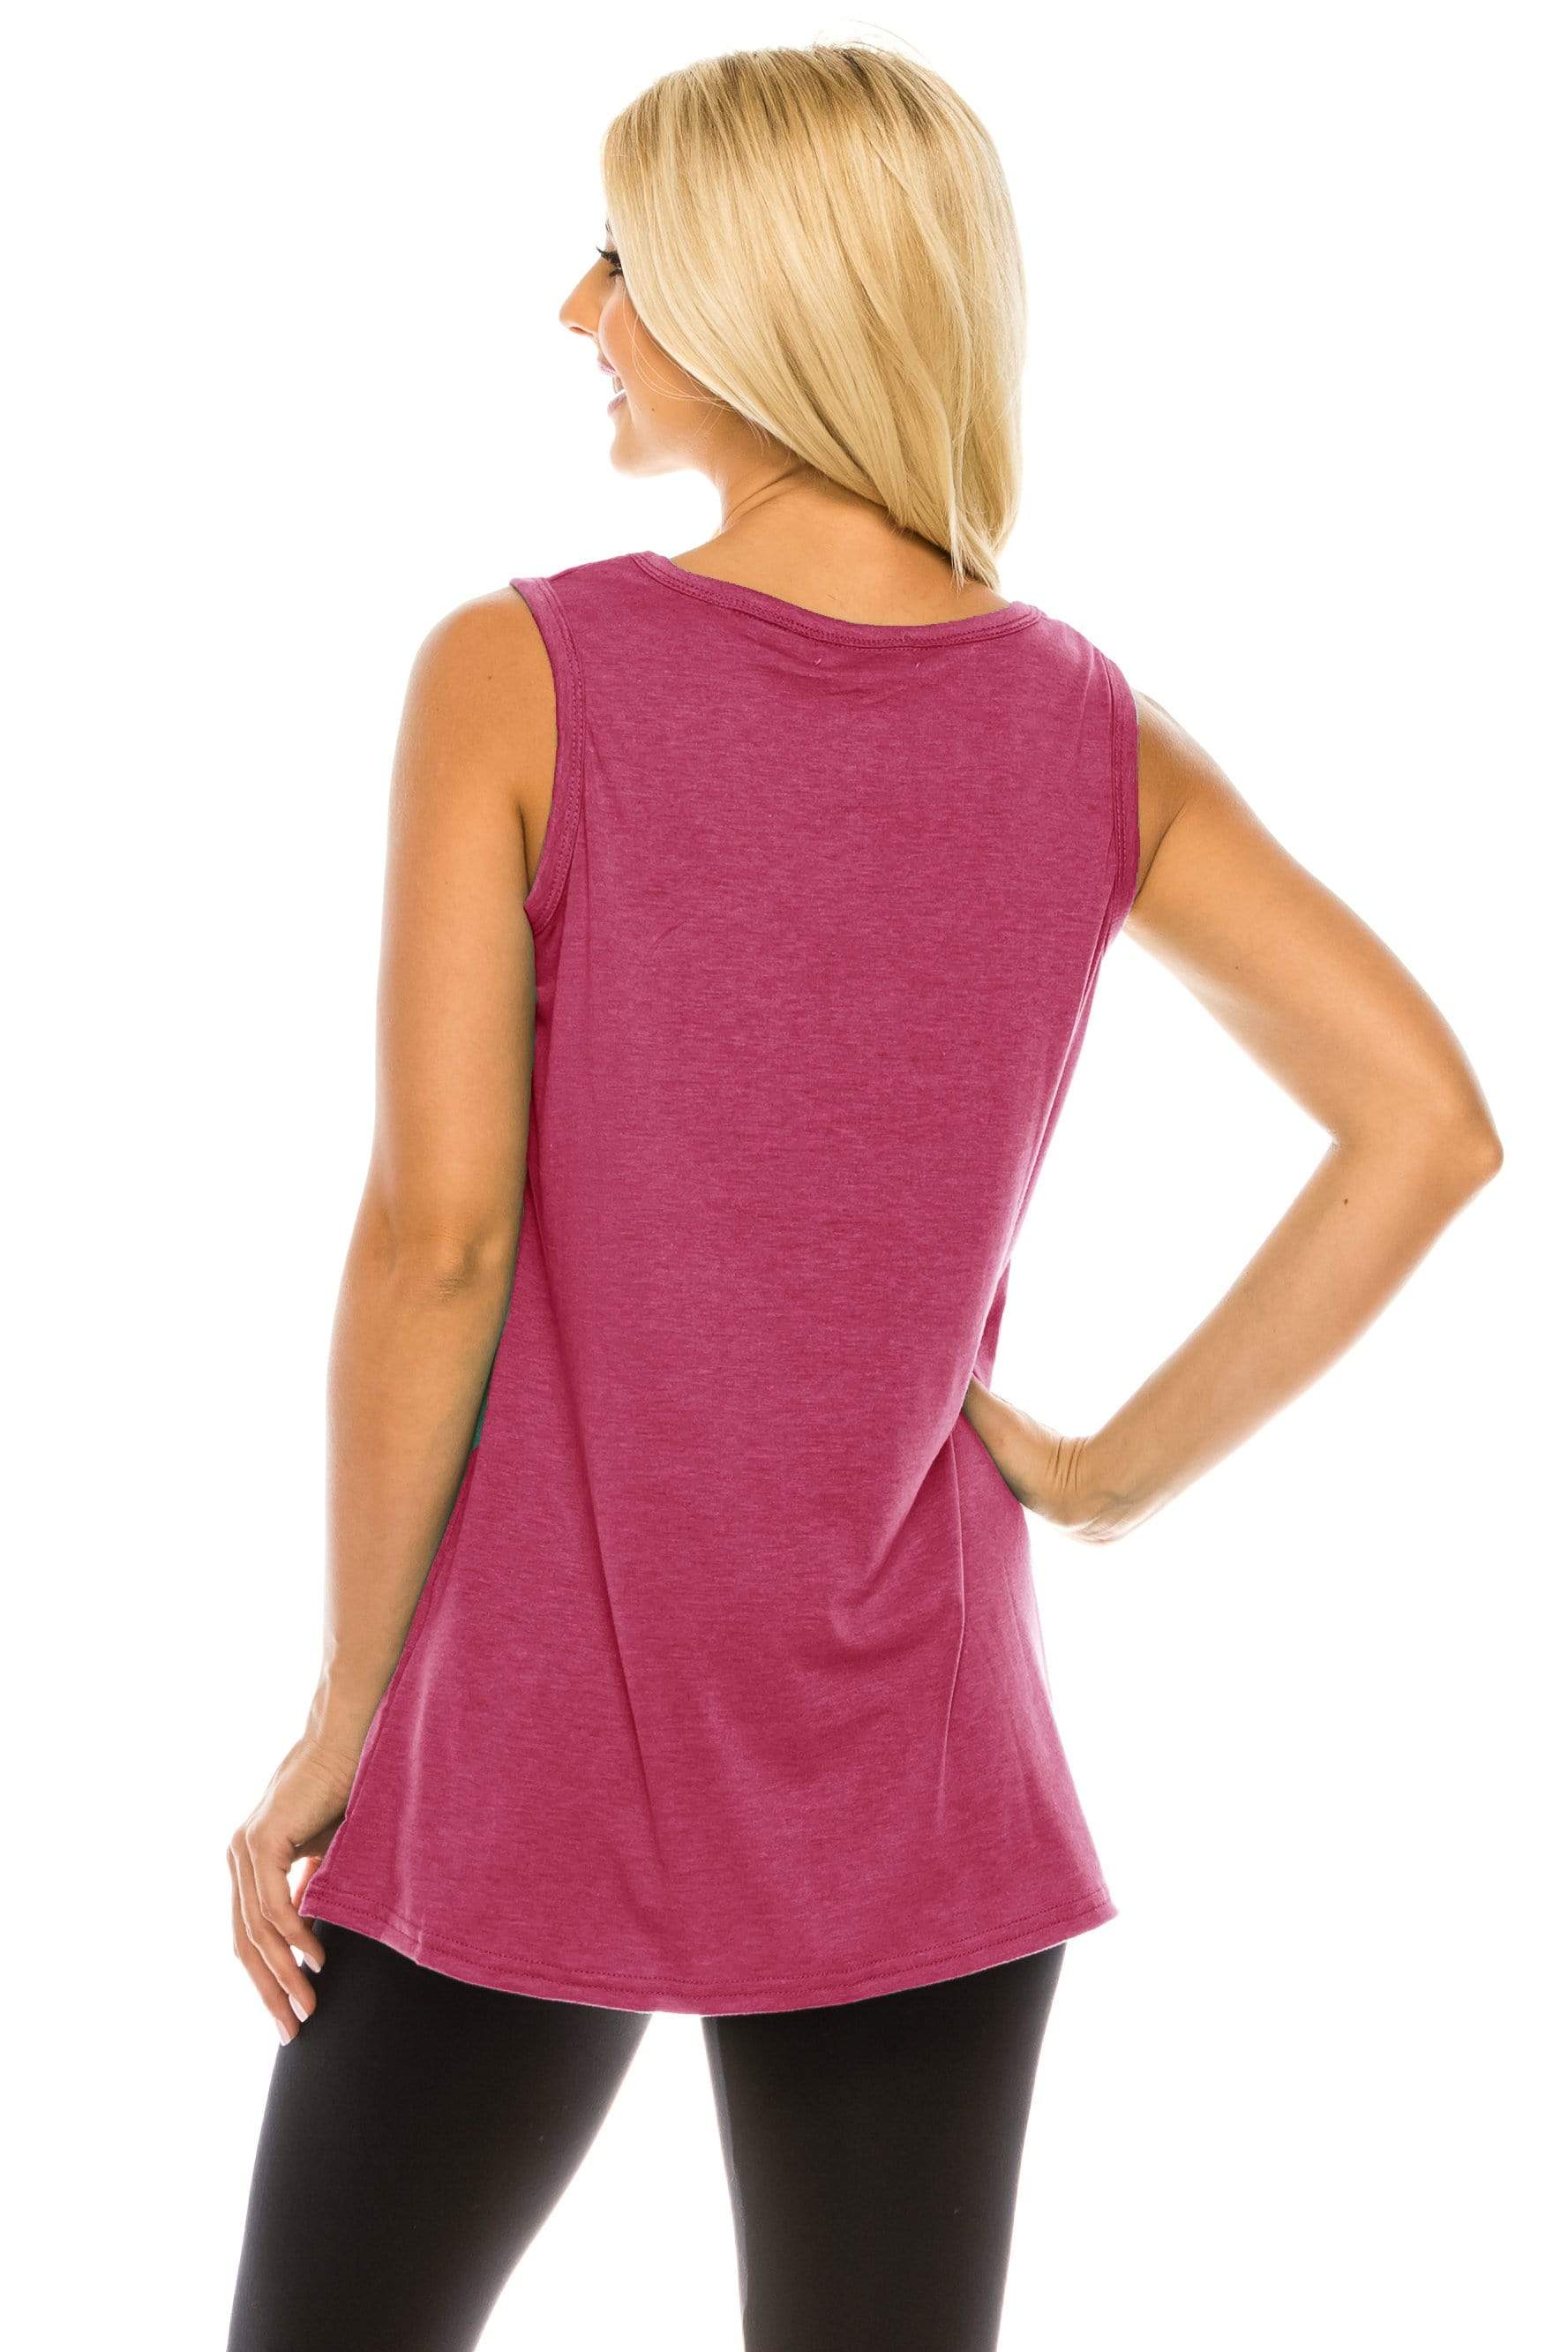 Haute Edition Women's Vacay Mode Loose Fit Tank top. Plus size available Daily Haute